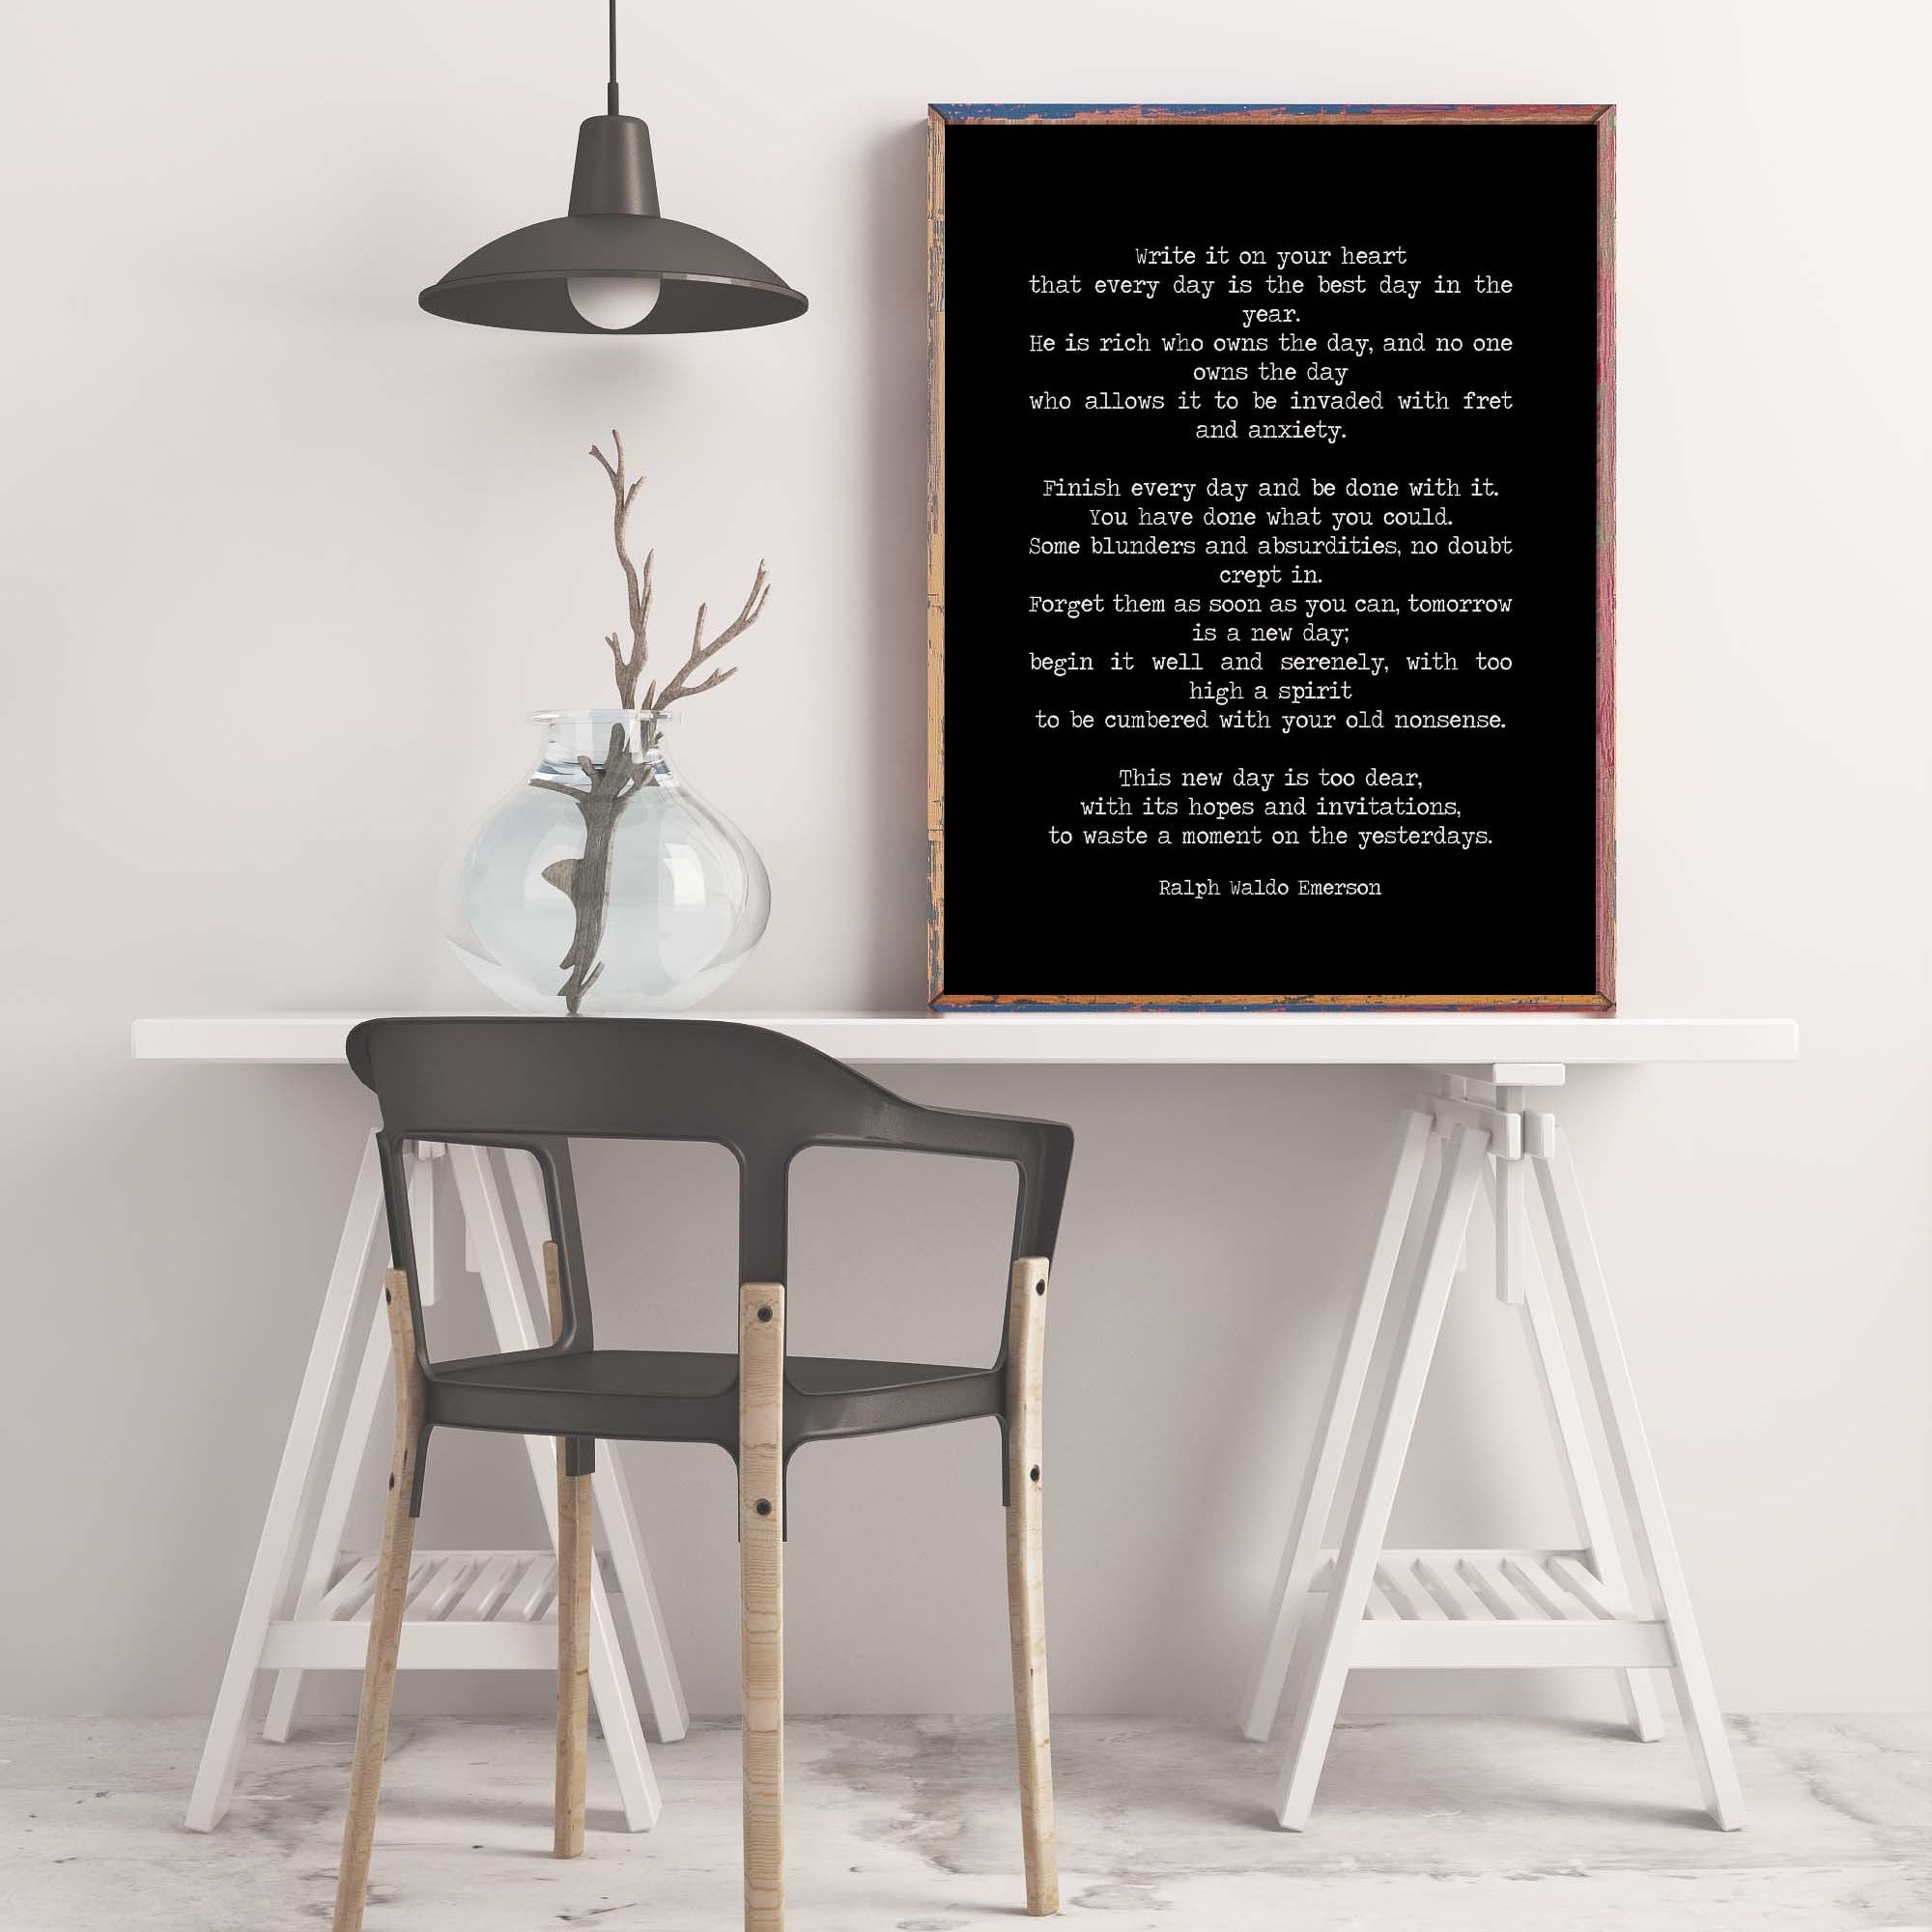 Ralph Waldo Emerson Quote Print, He Is Rich Who Owns The Day Black & White Inspirational Print For Home Decor Unframed - BookQuoteDecor